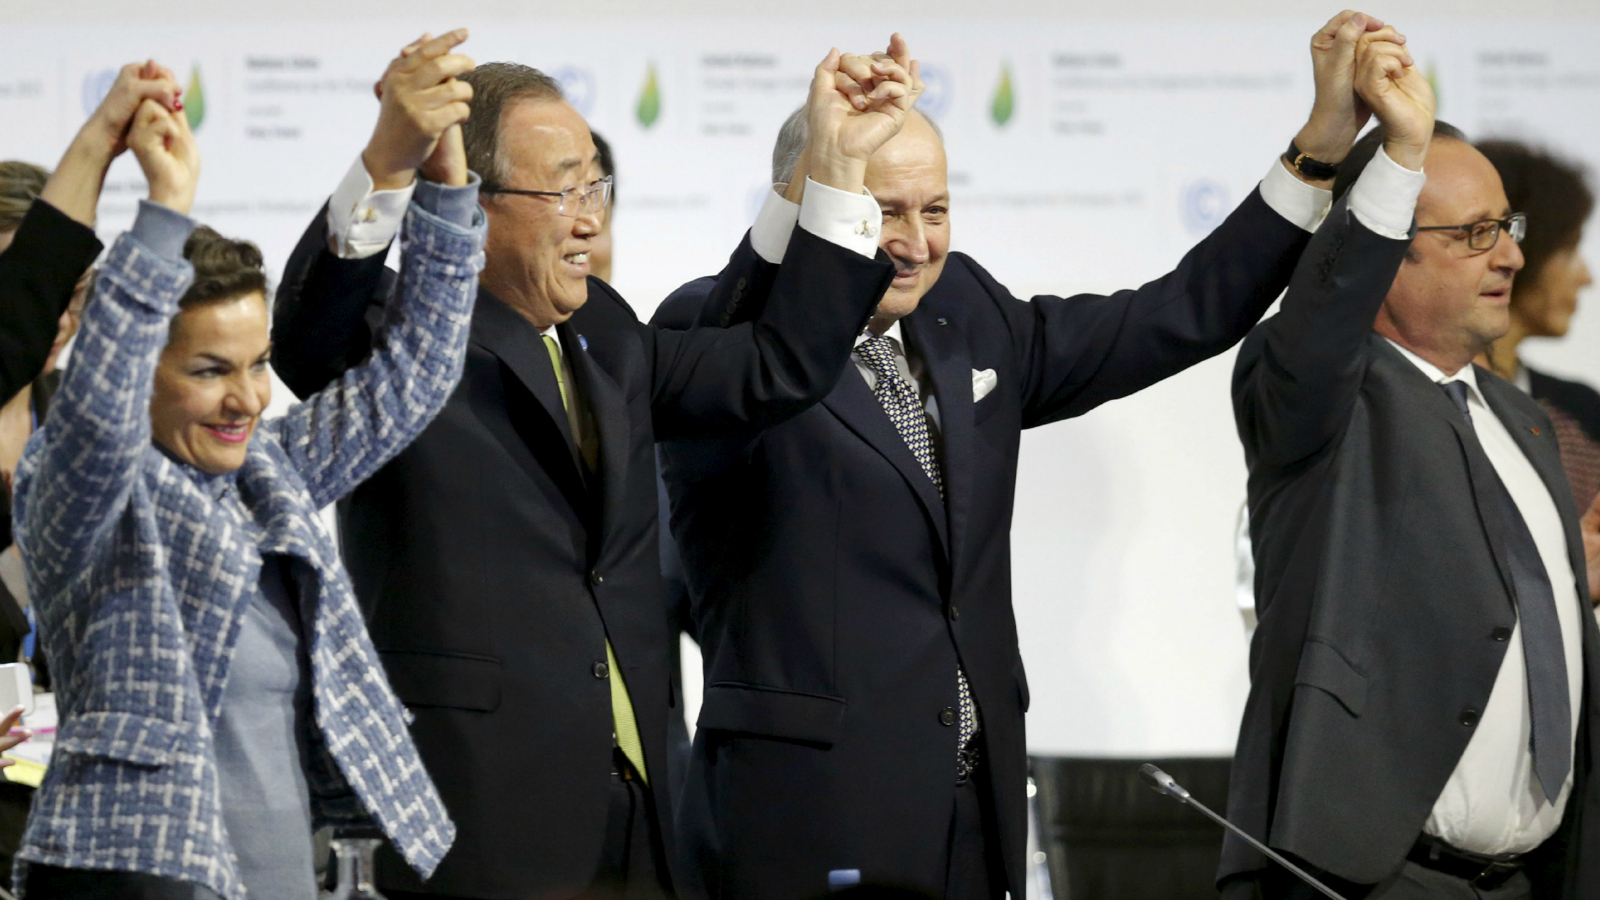 From L-R, Christiana Figueres, Executive Secretary of the UN Framework Convention on Climate Change, United Nations Secretary-General Ban Ki-moon, French Foreign Affairs Minister Laurent Fabius, President-designate of COP21 and French President Francois Hollande react during the final plenary session at the World Climate Change Conference 2015 (COP21) at Le Bourget, near Paris, France, December 12, 2015.